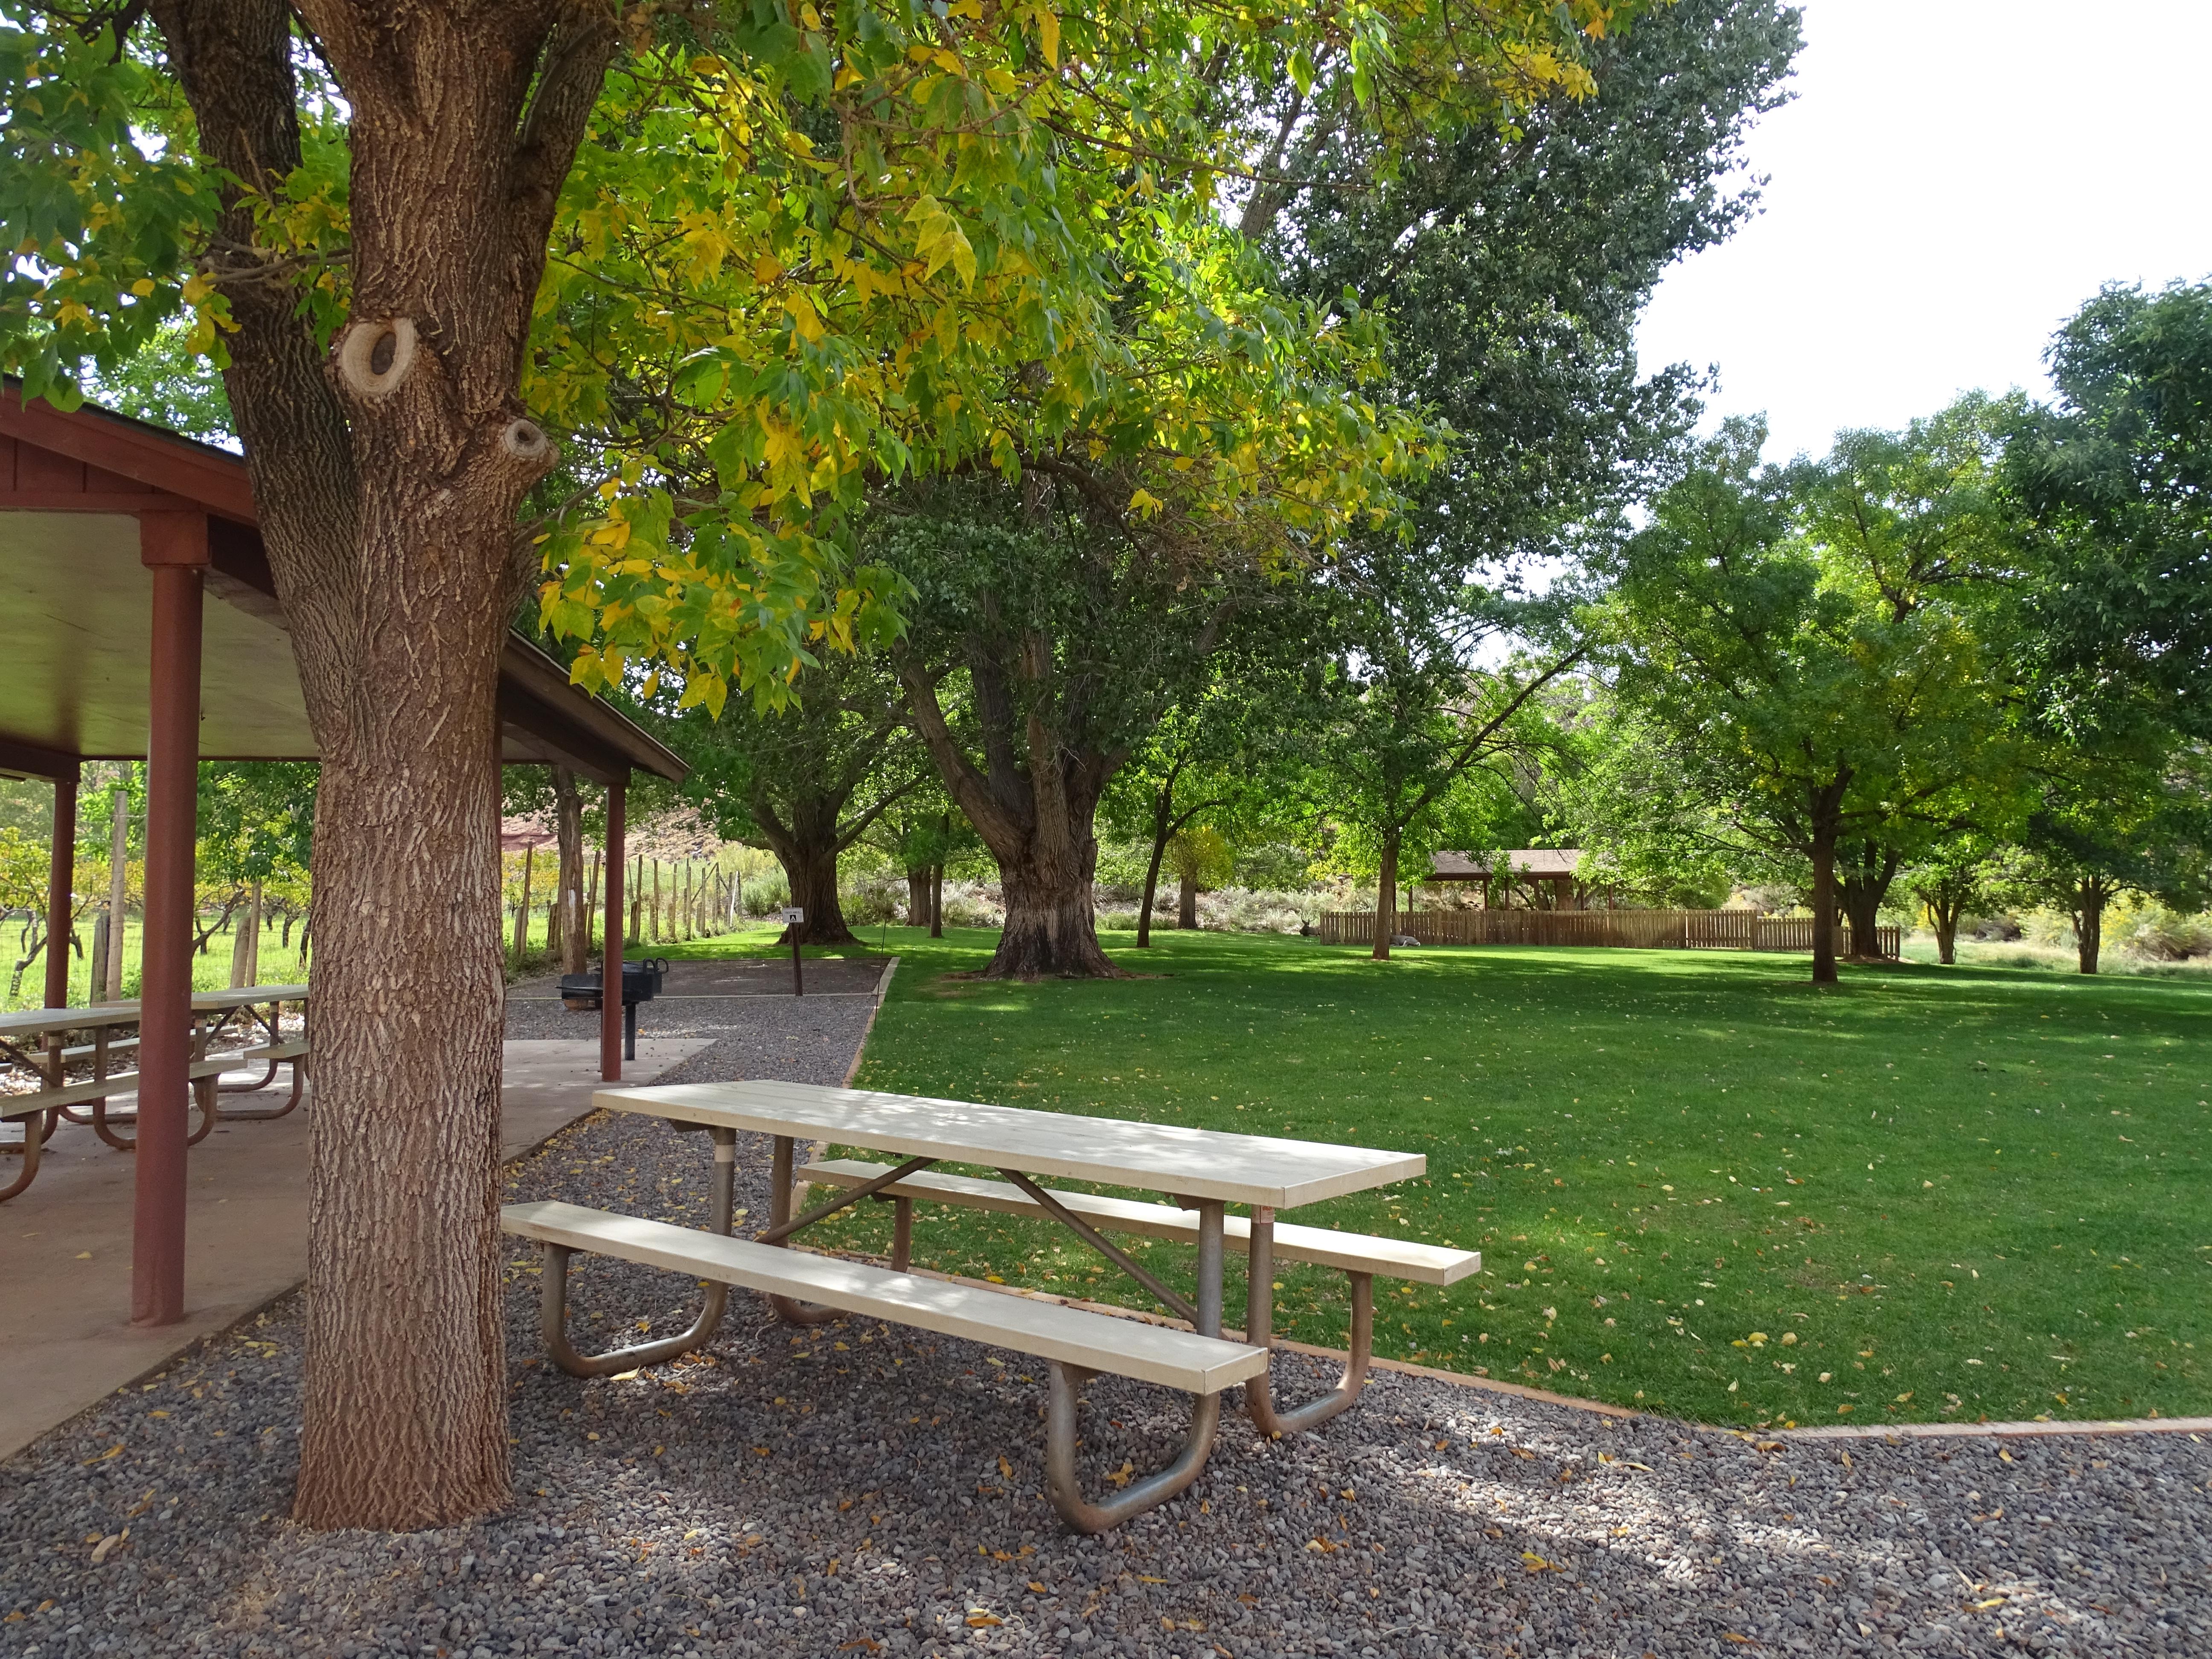 A grassy area shaded by tall trees with covered areas for picnic tables.